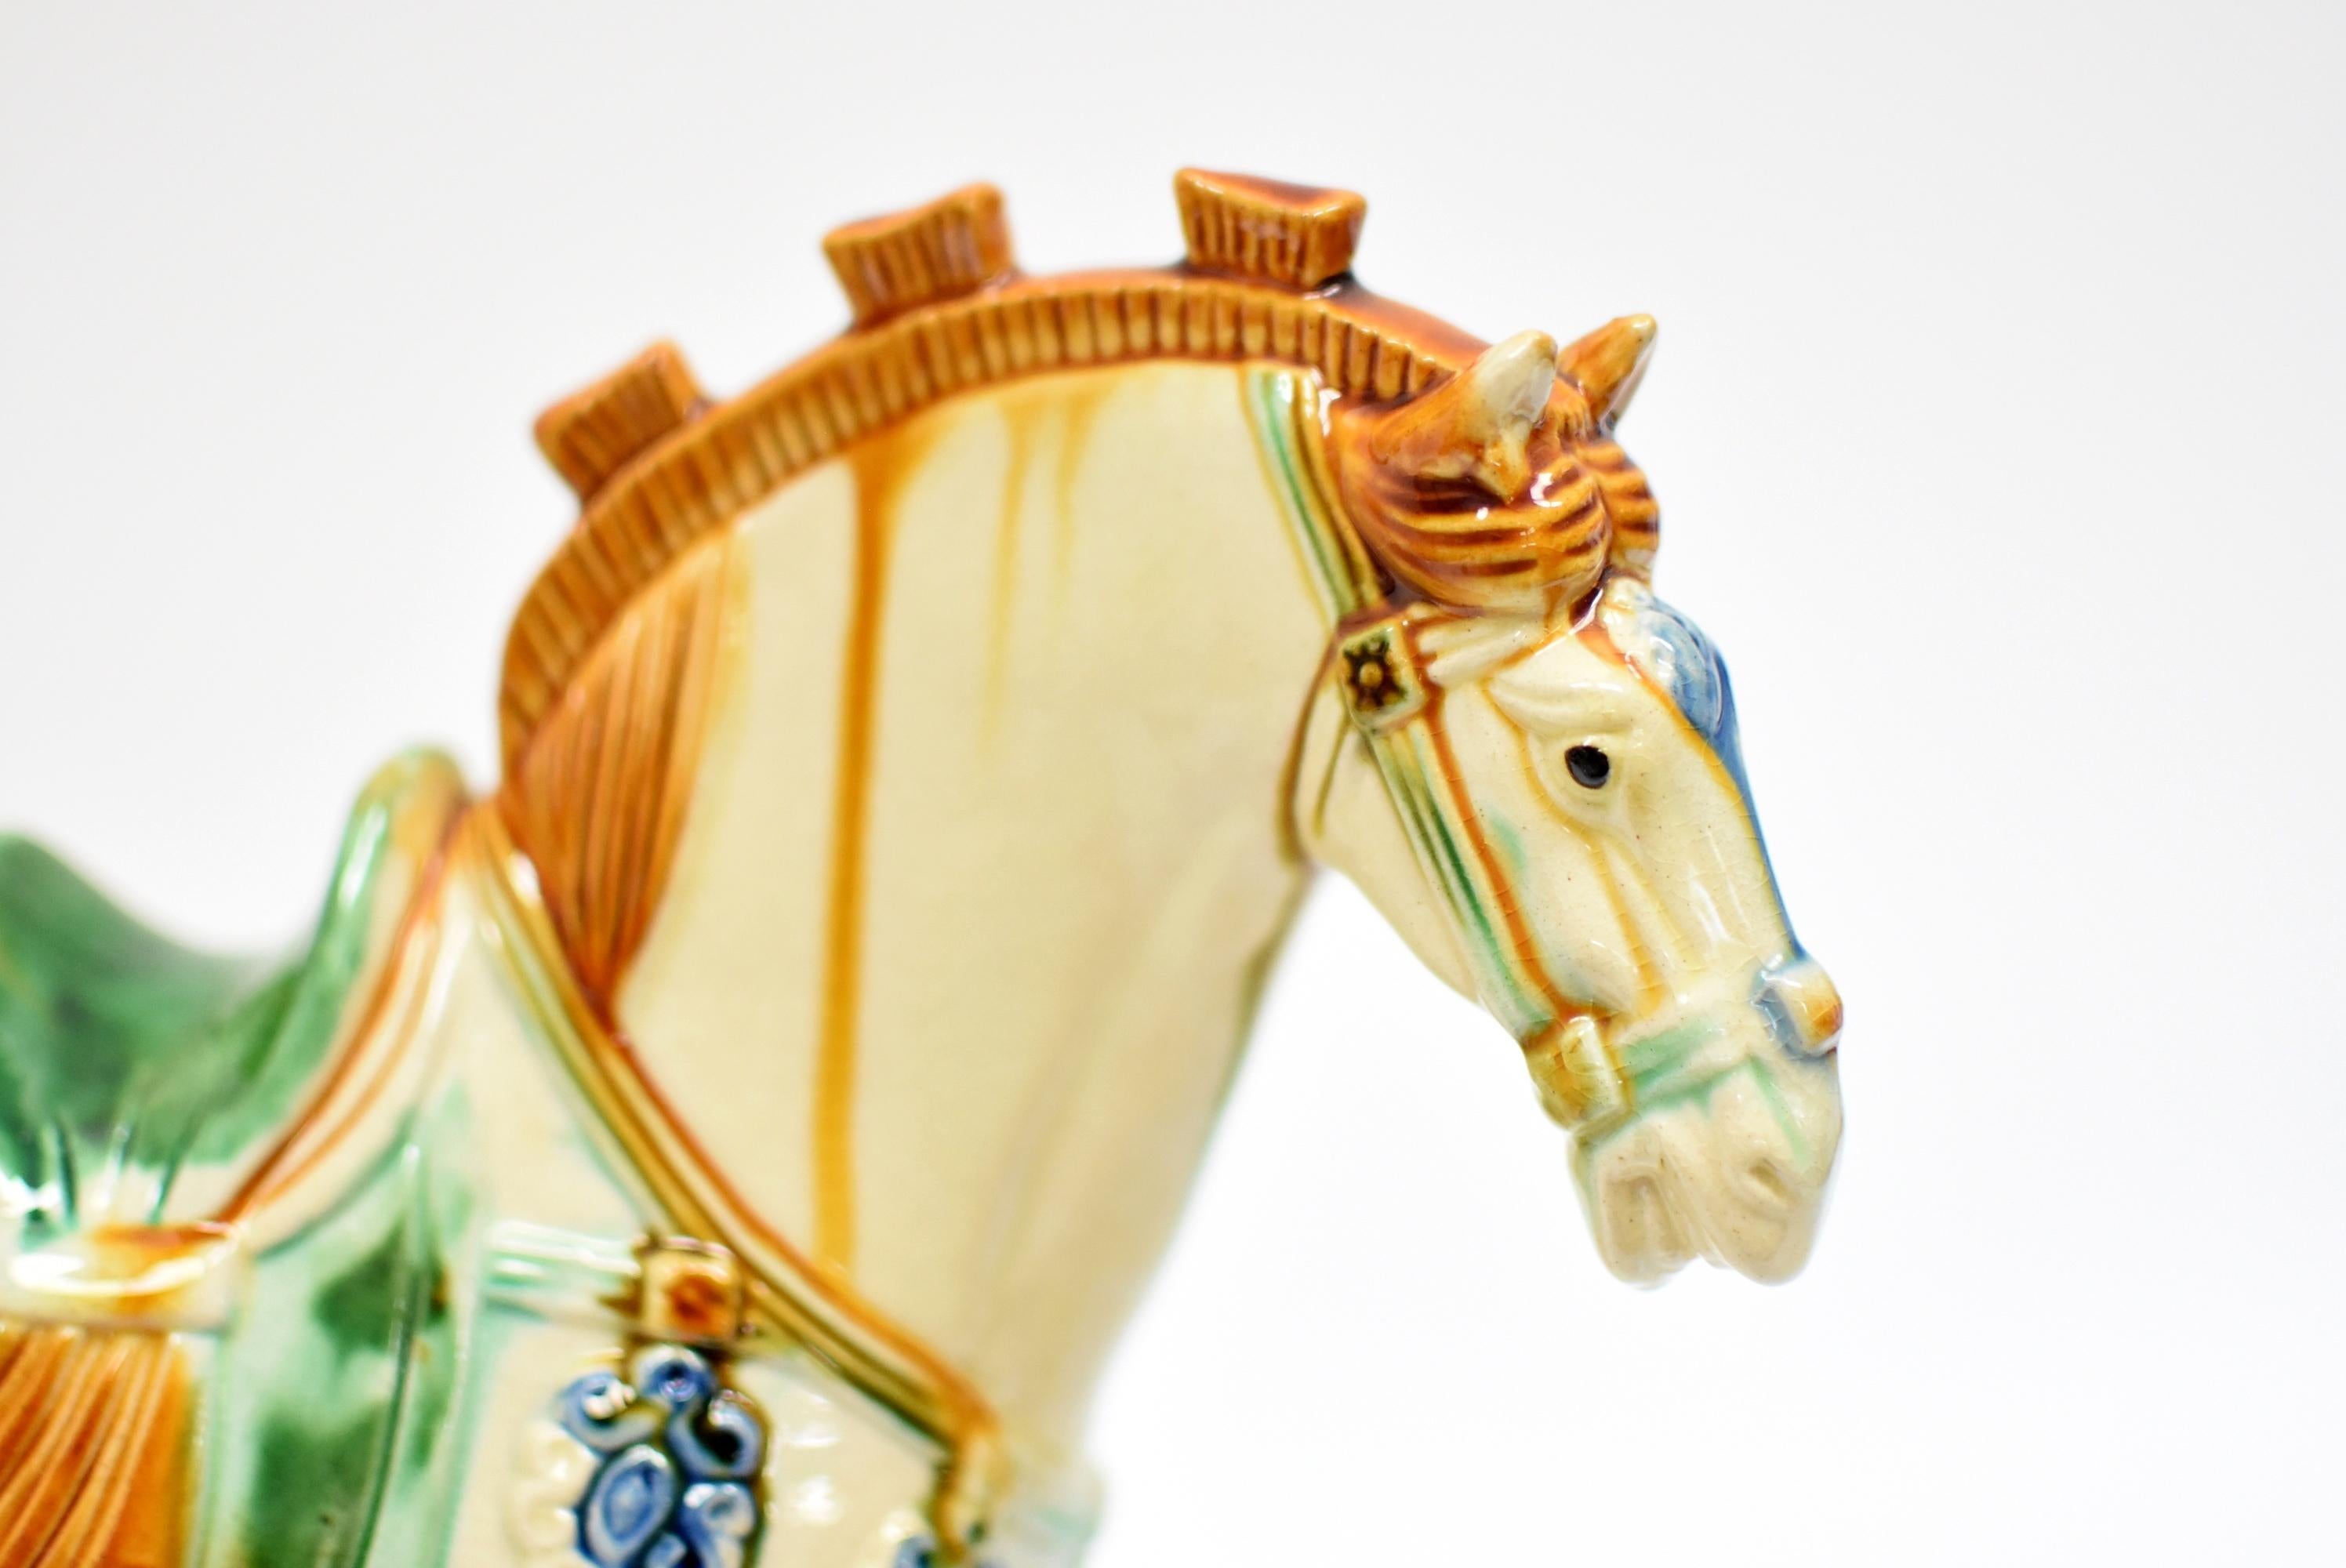 A beautiful white San Cai horse in high gloss. The Sancai technique dates back to the Tang dynasty (618–907AD). It produces highly artistic, refined sculptures with brilliant colors and glazes. This horse has well defined muscles and calm